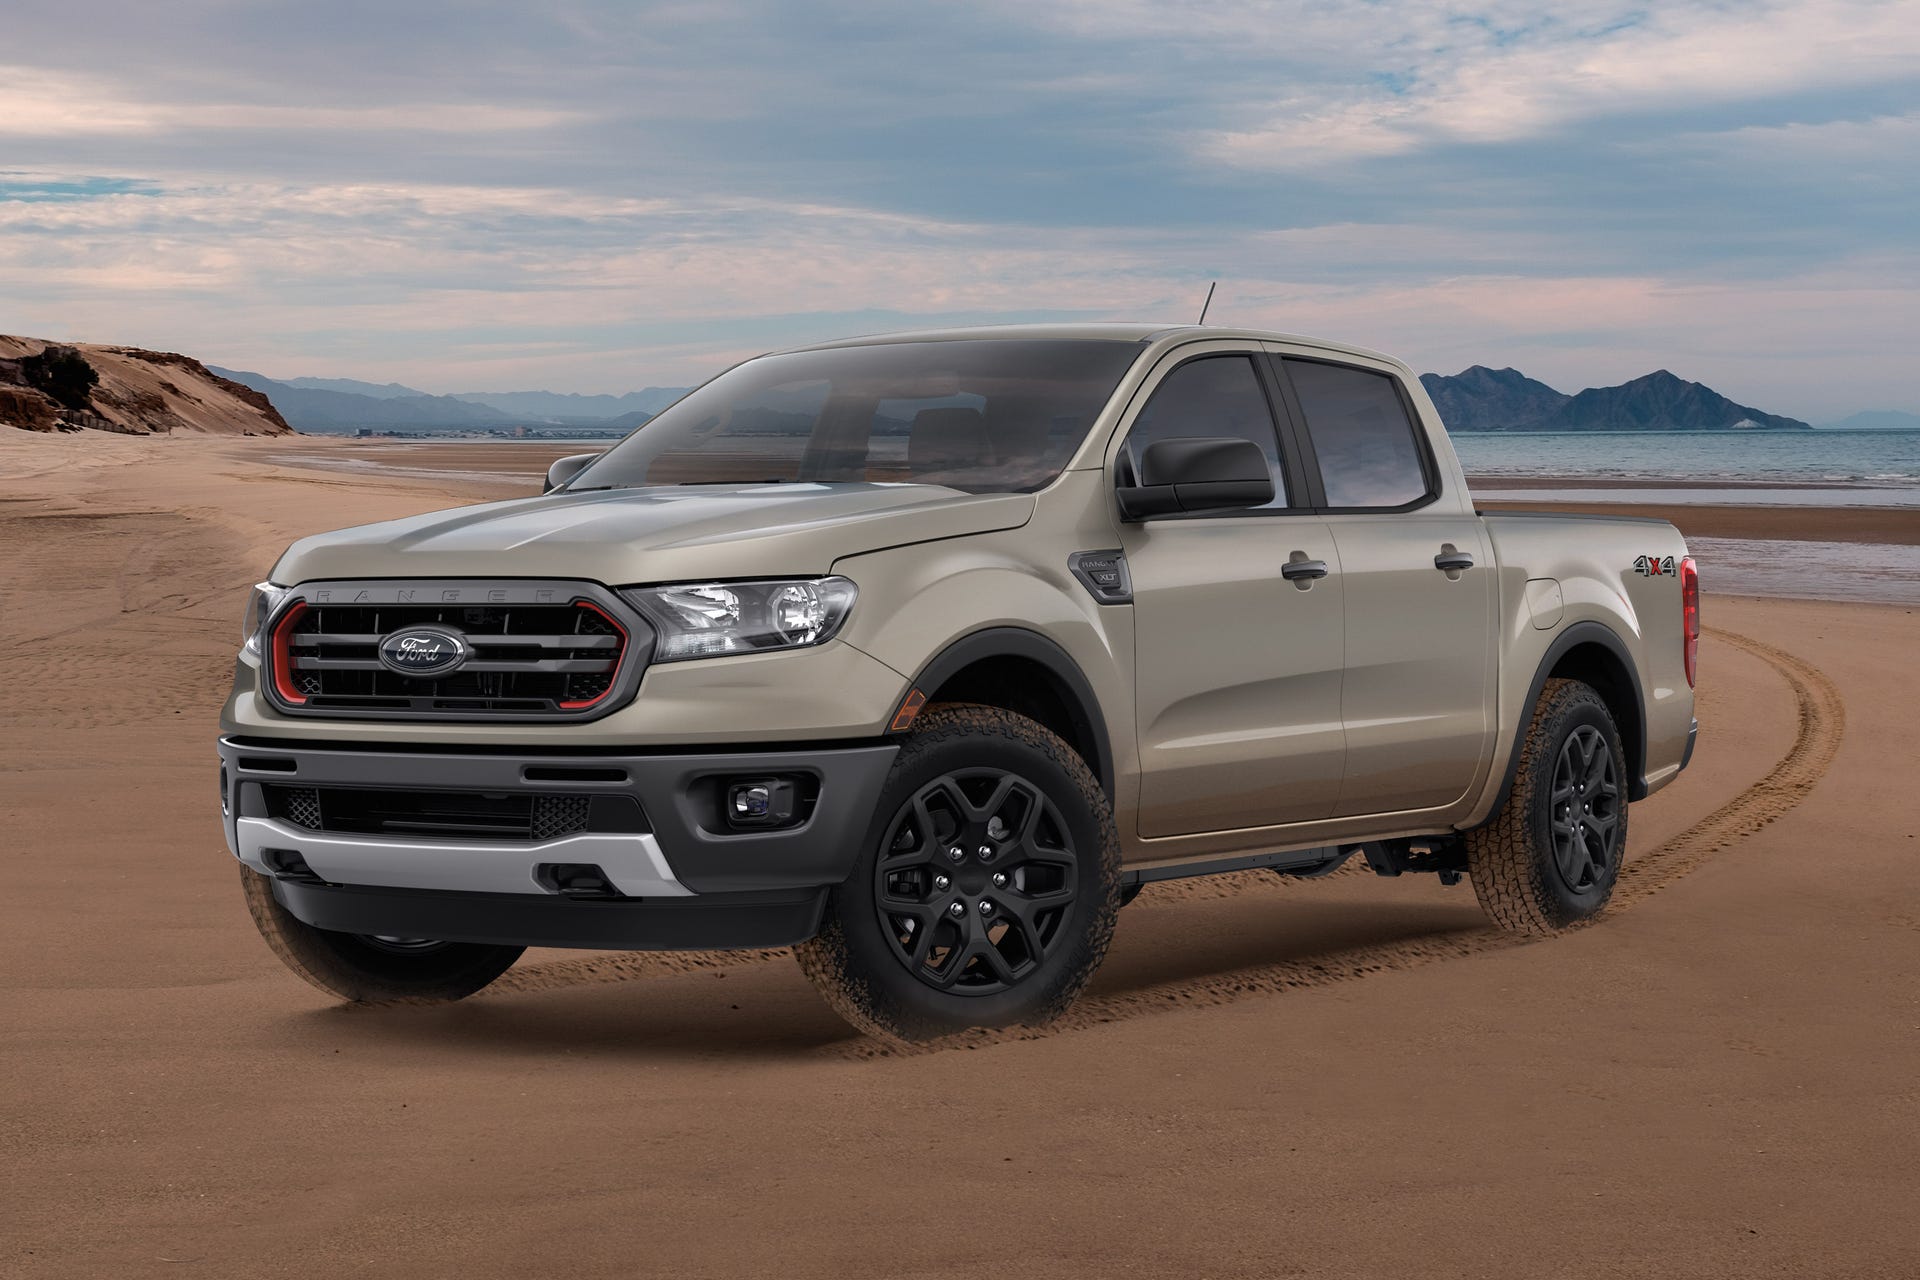 Ford Ranger: Which Should You Buy, 2021 or 2022?